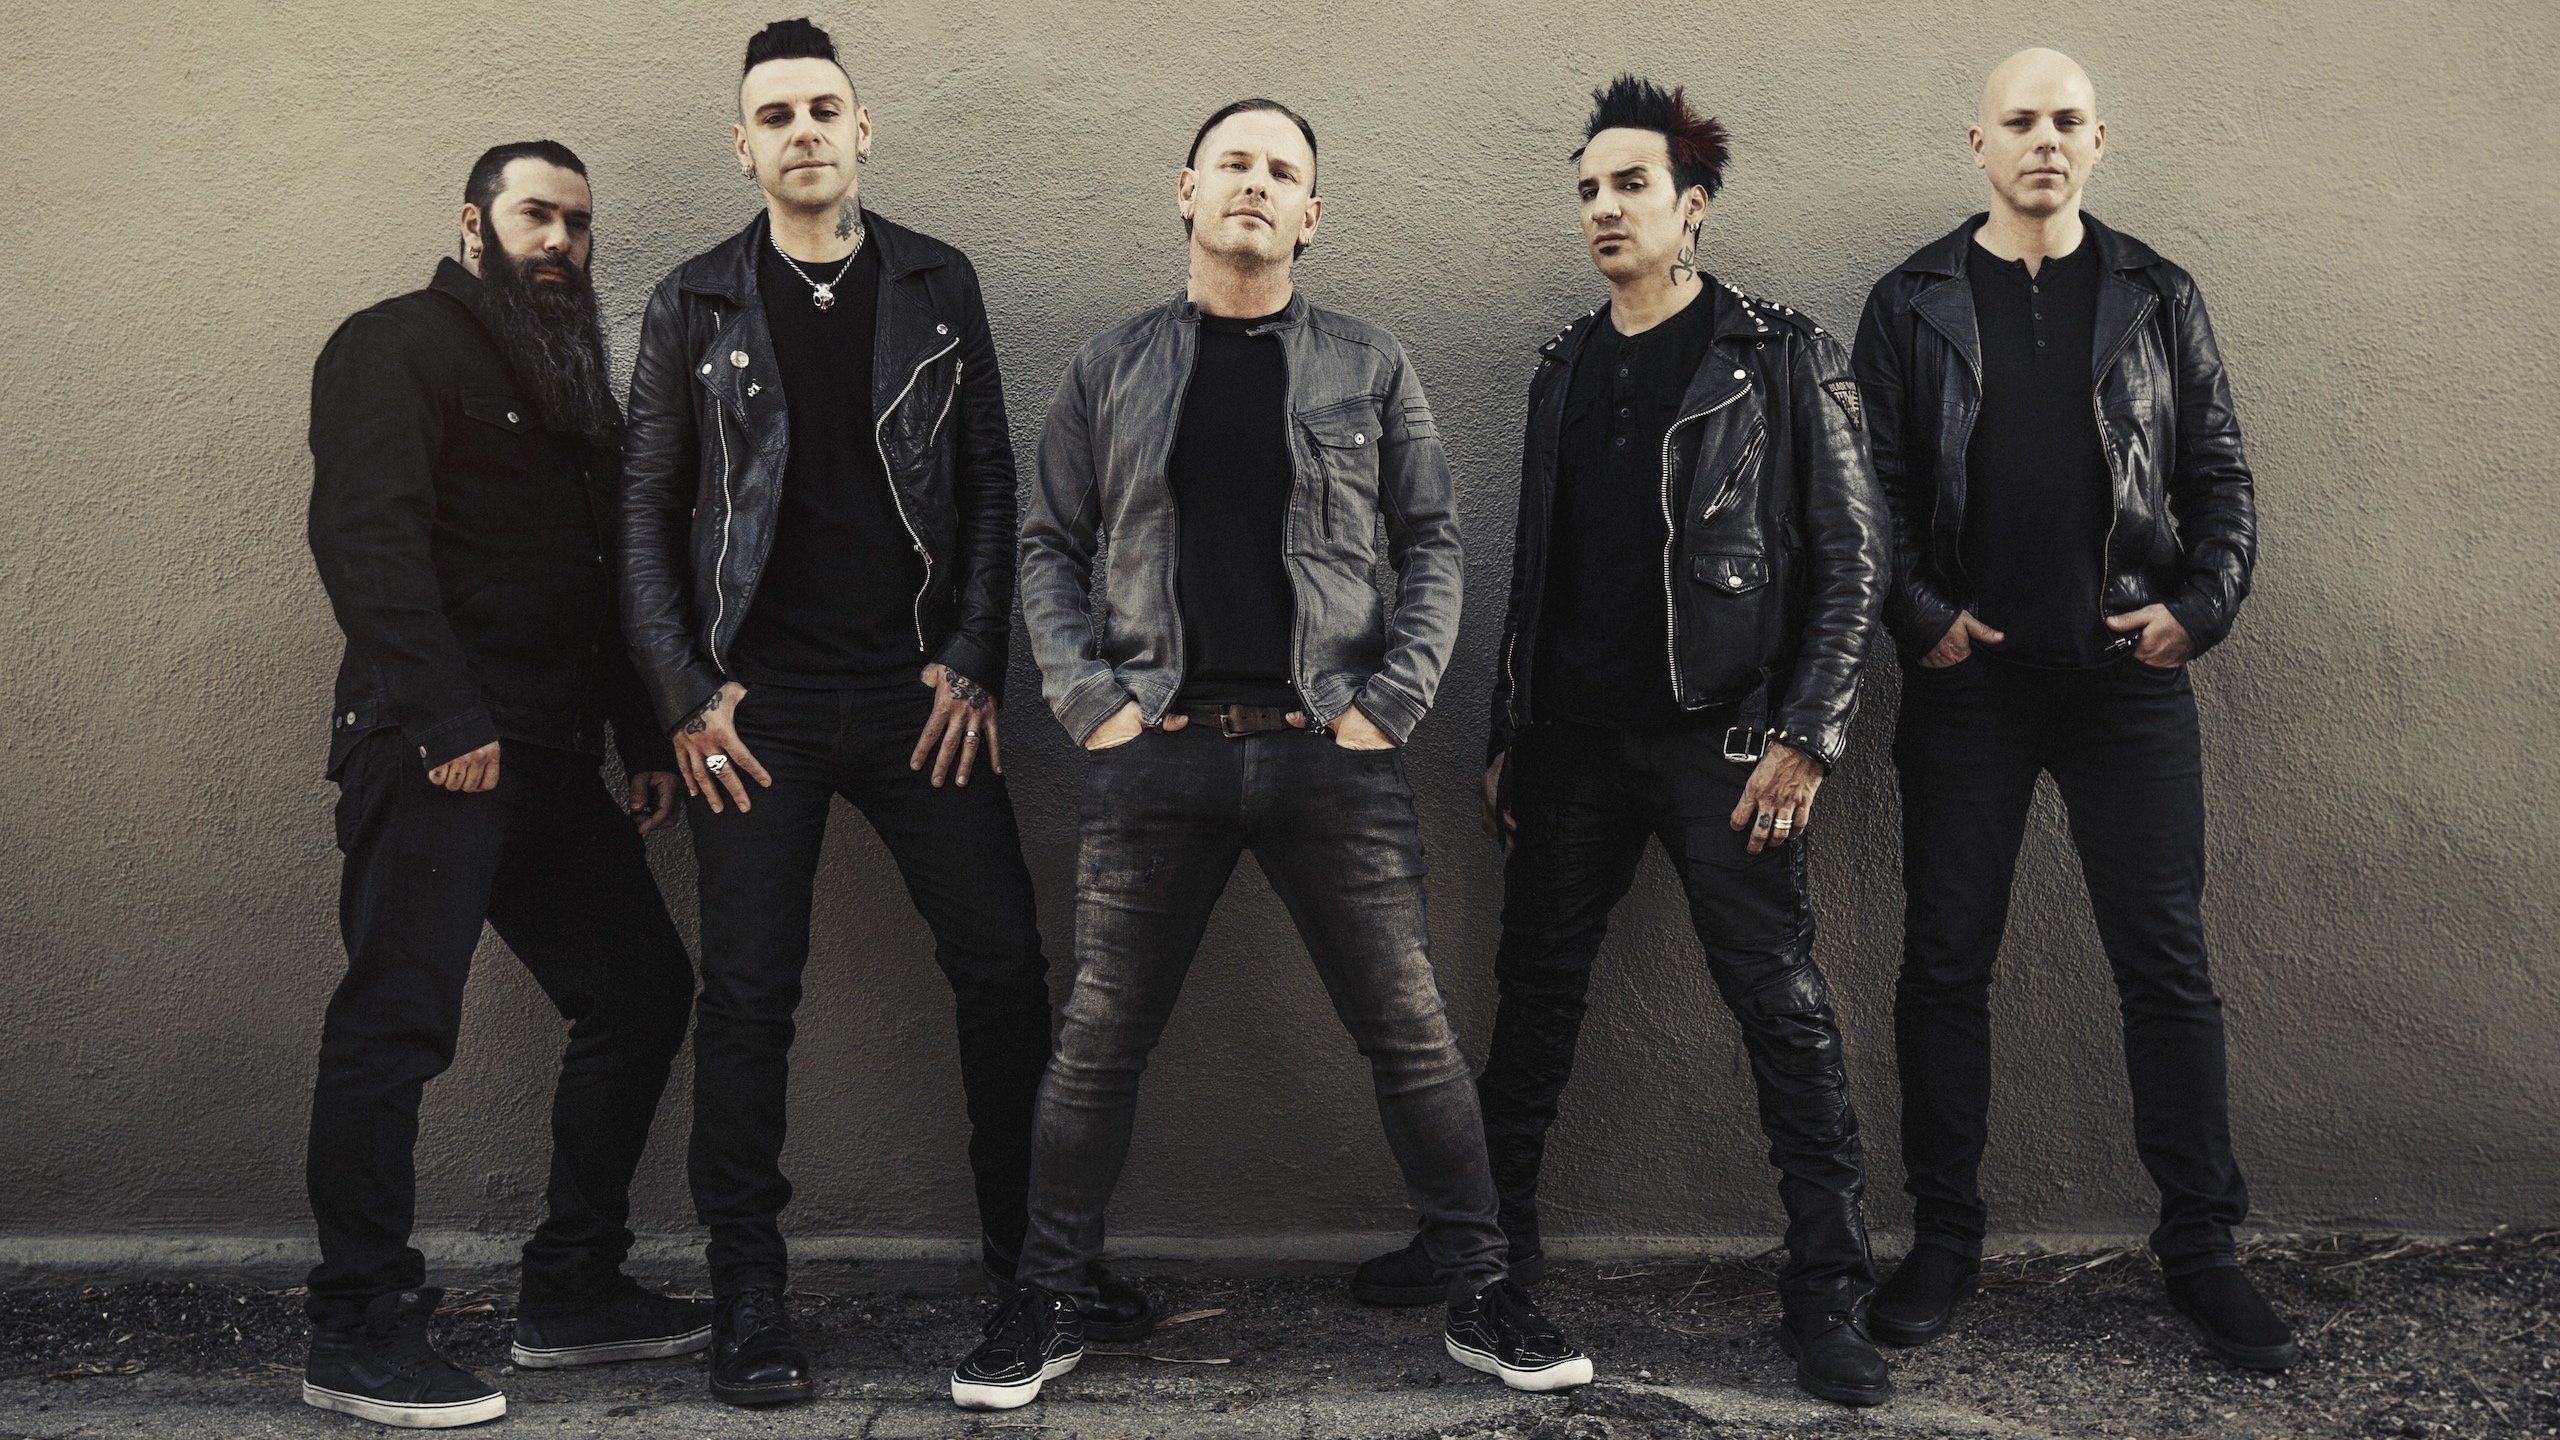 Stone Sour Wallpapers - Top Free Stone Sour Backgrounds 2560x1440